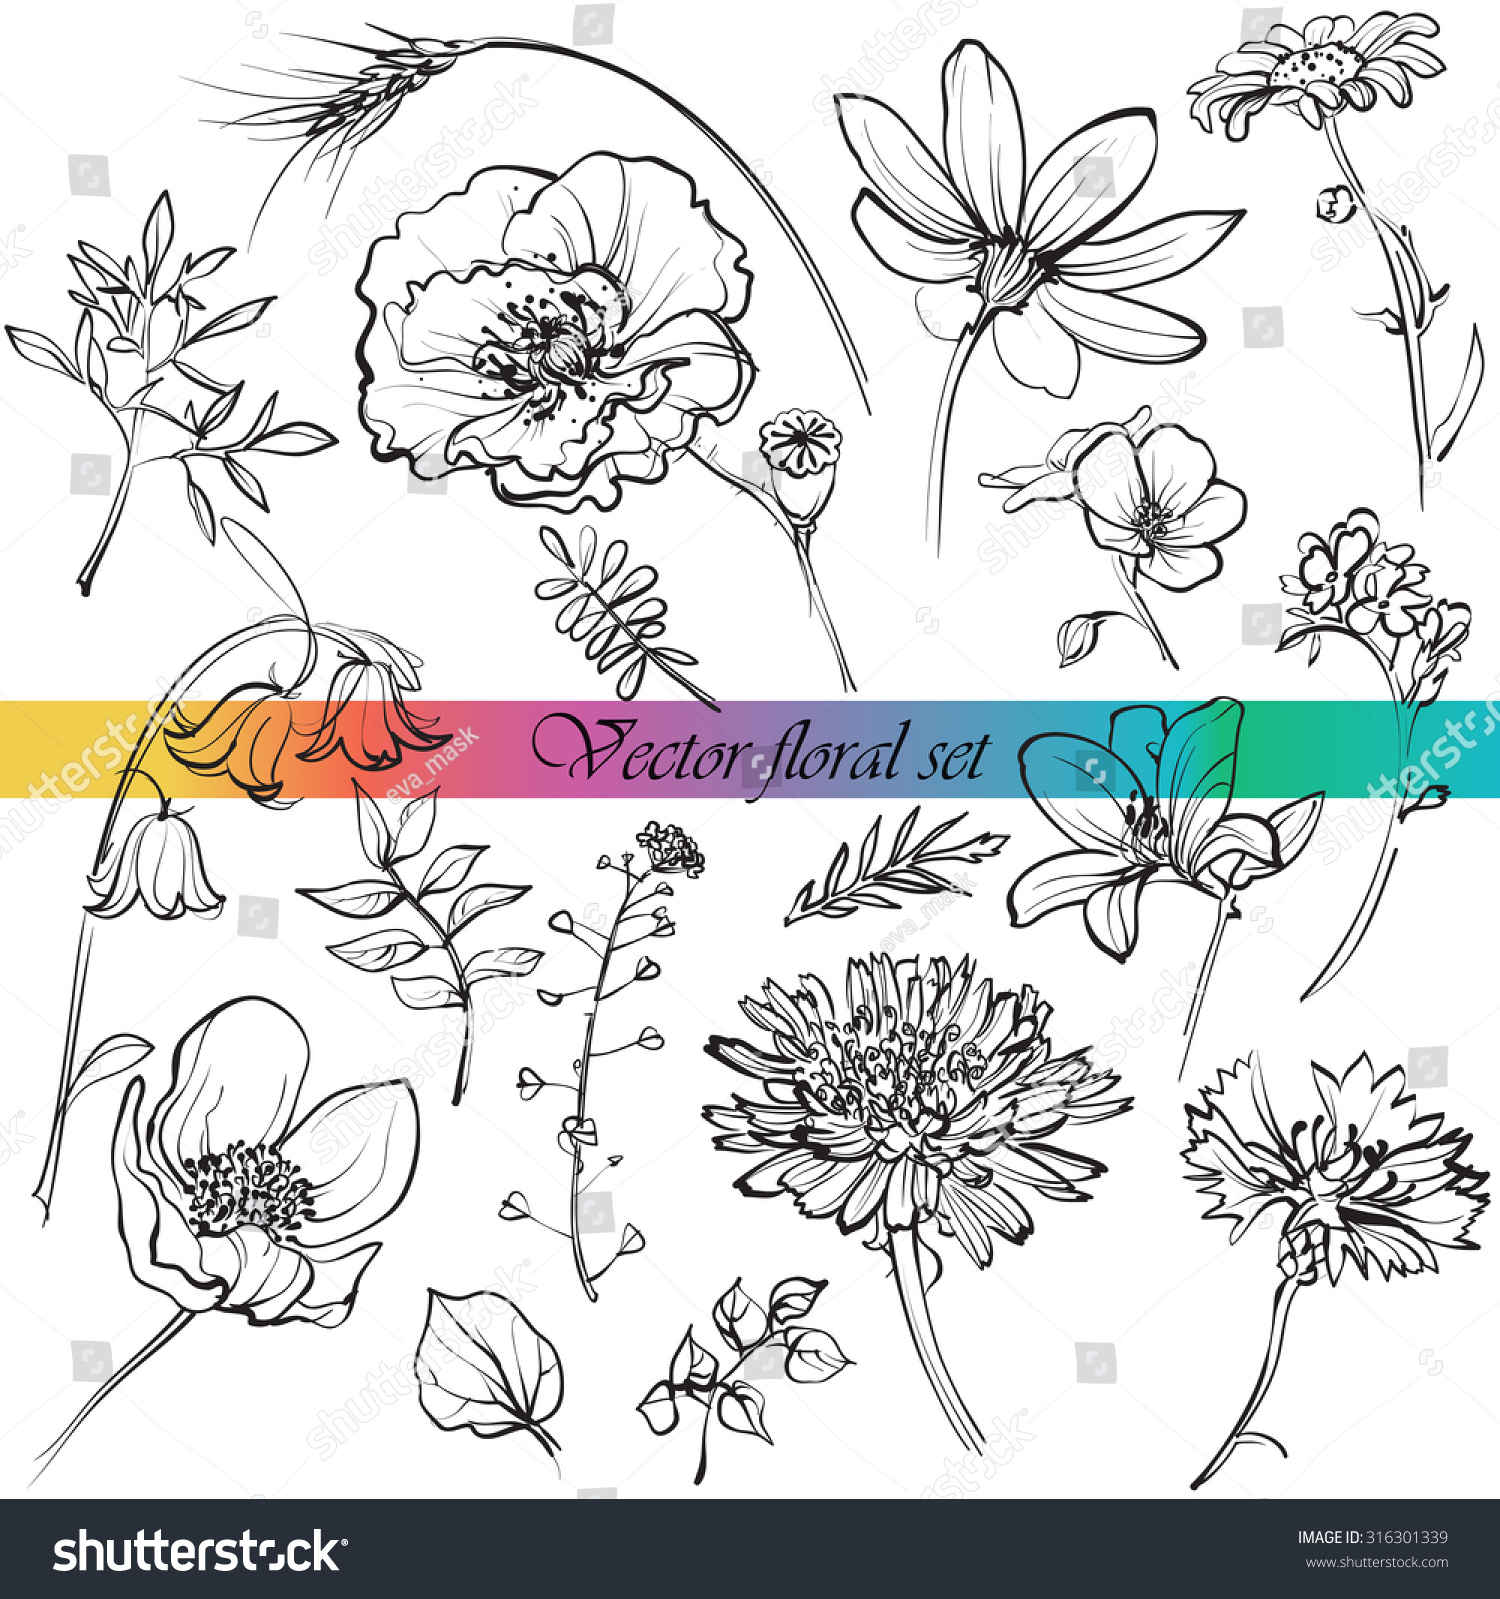 Line Drawings Of Wildflowers, Grasses And Leaves For Your Design, White